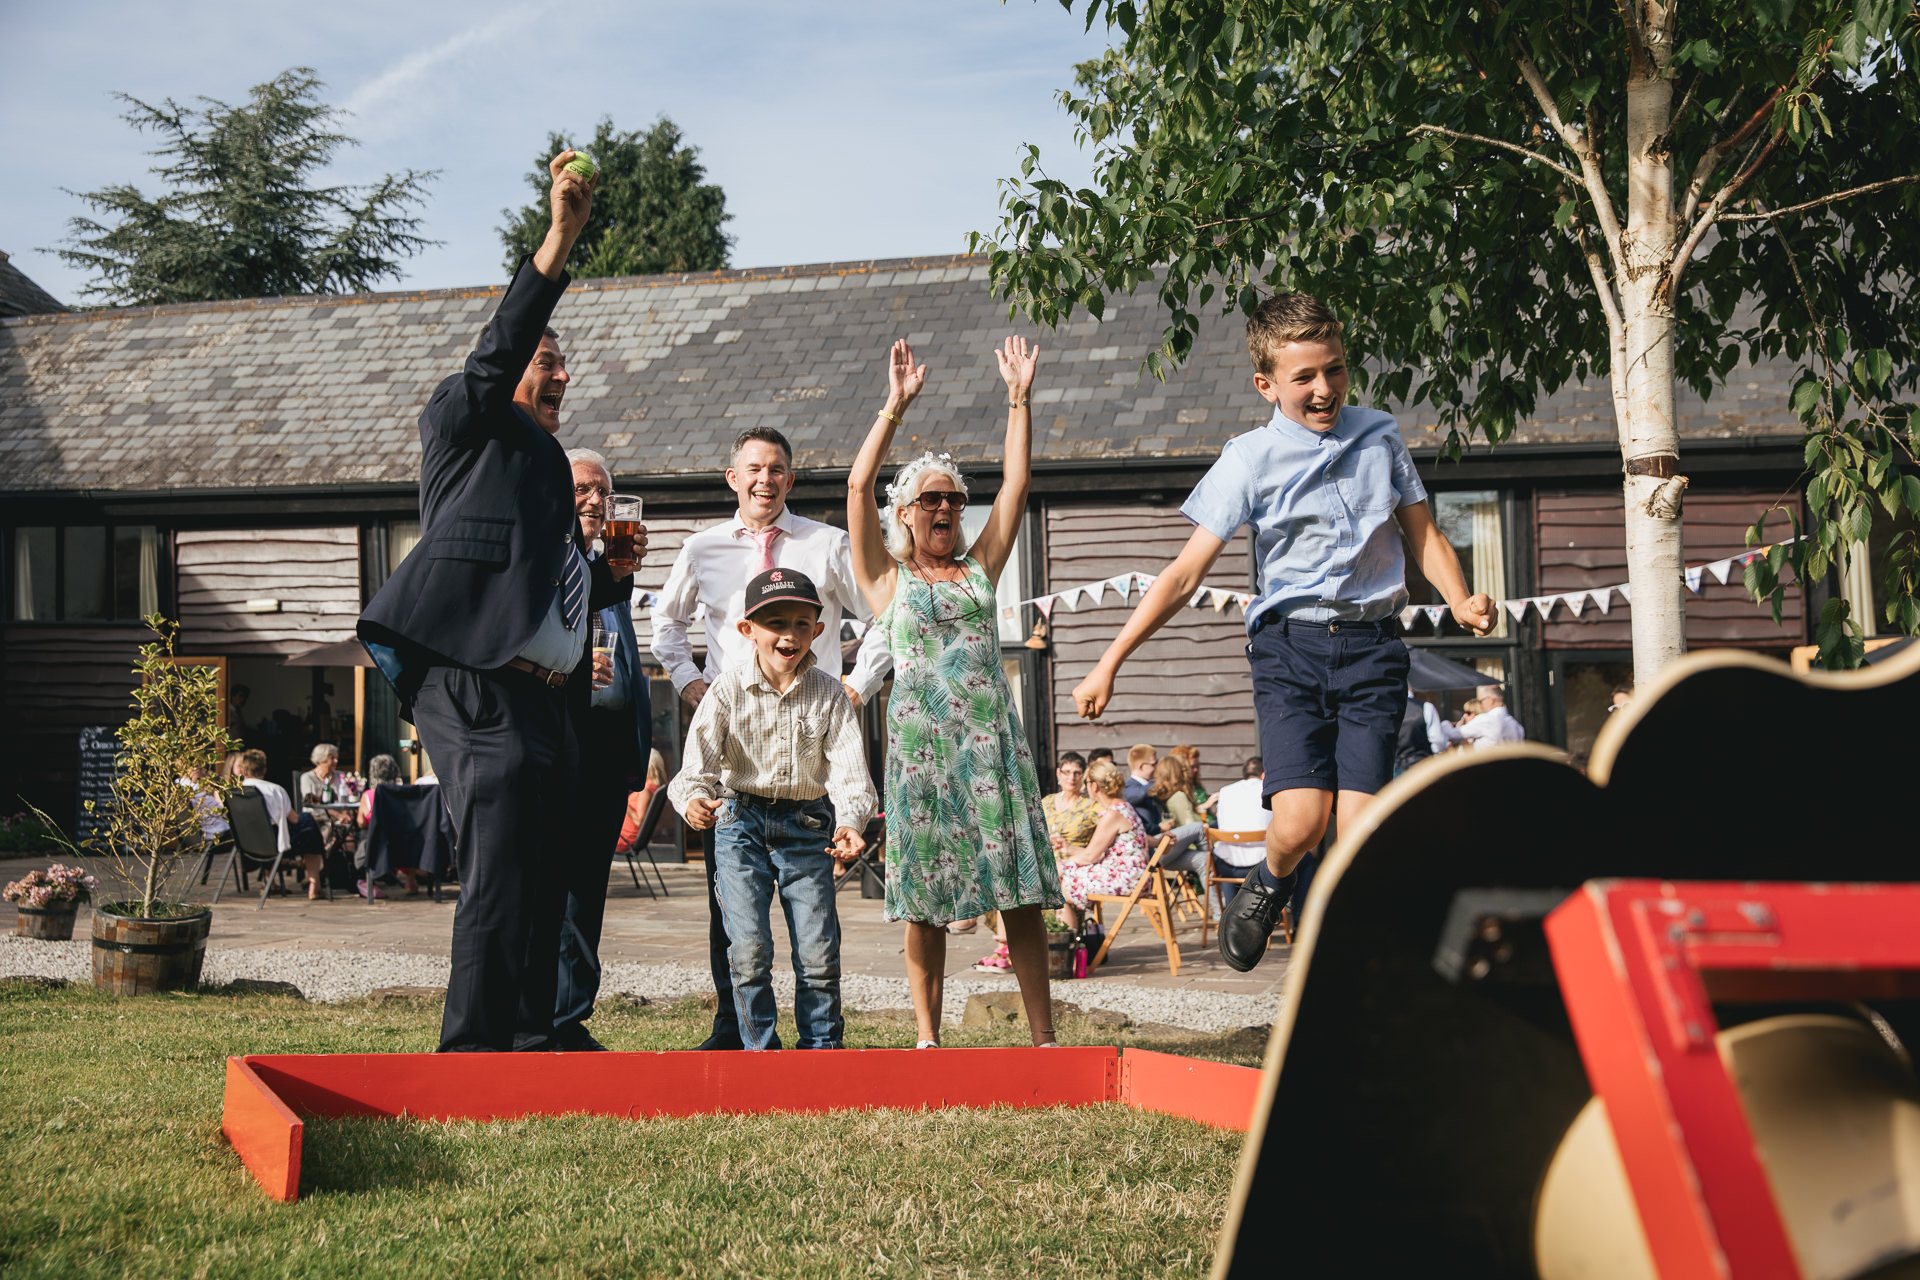 Wedding guests playing village fete games and cheering